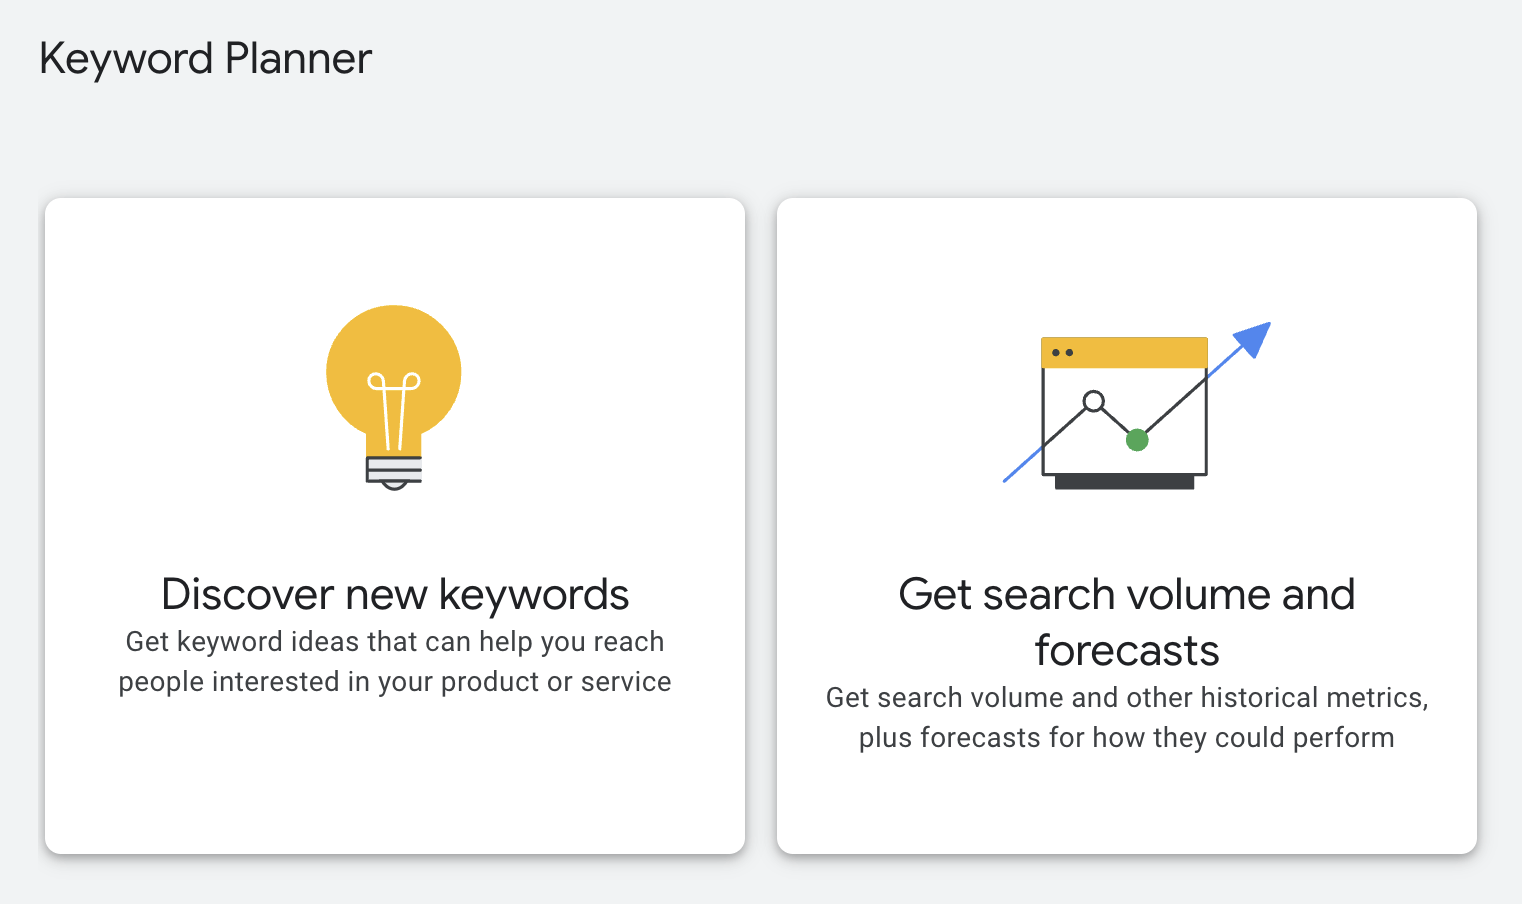 Keyword Planner has two options: discover new keywords, or get search volume and forecasts